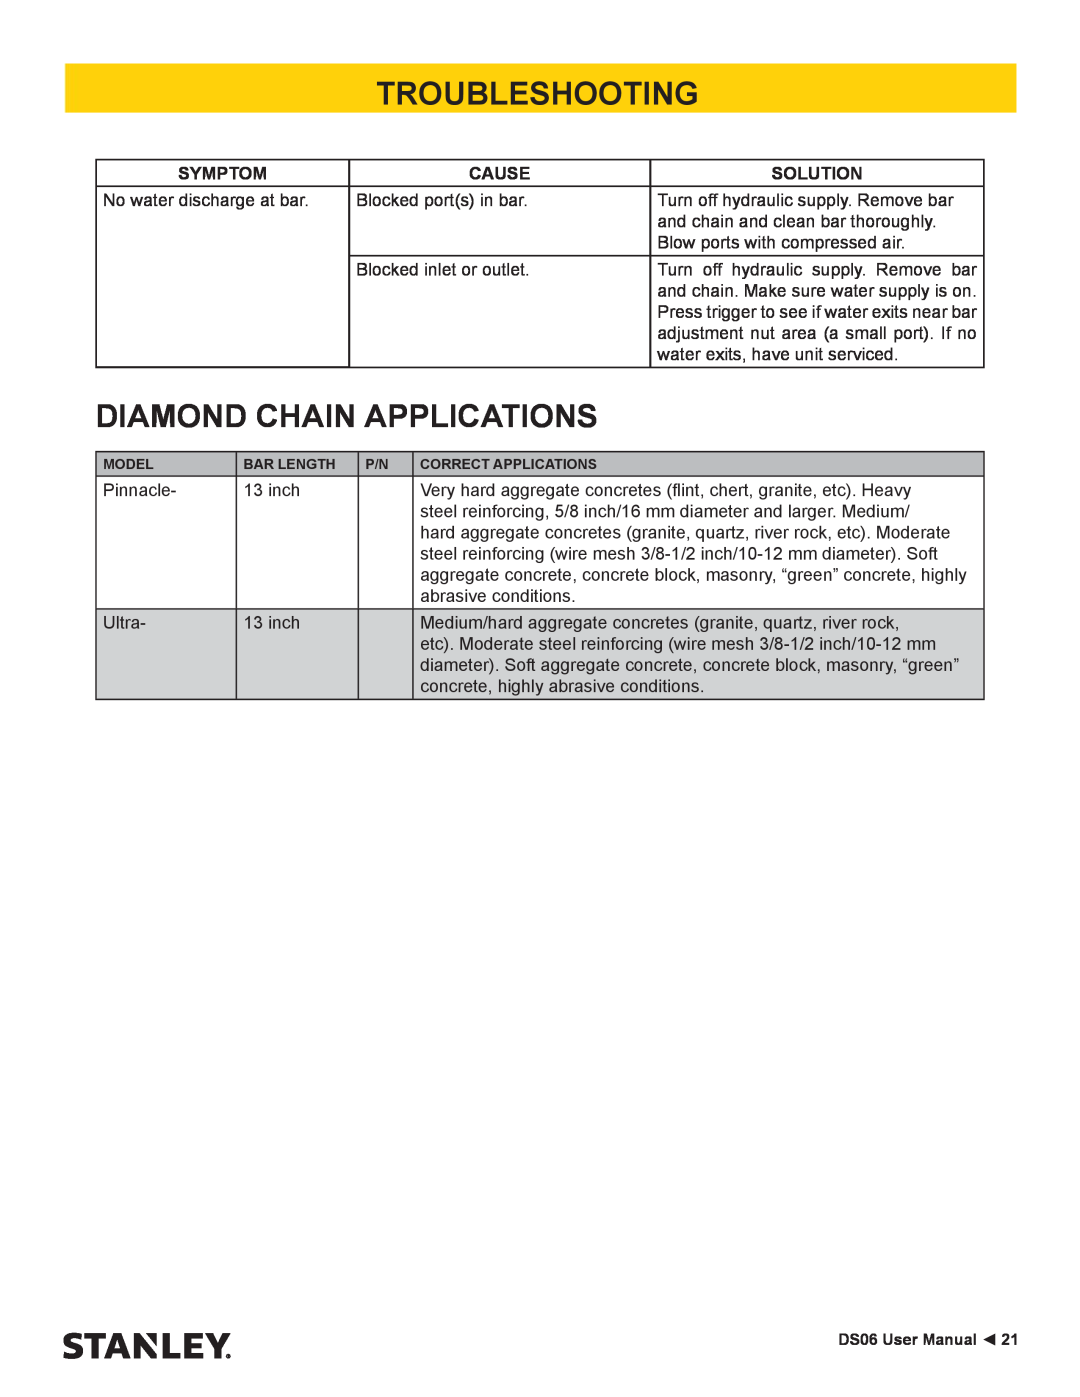 Stanley Black & Decker DS06 user manual Diamond Chain Applications, Troubleshooting, Symptom, Cause, Solution 